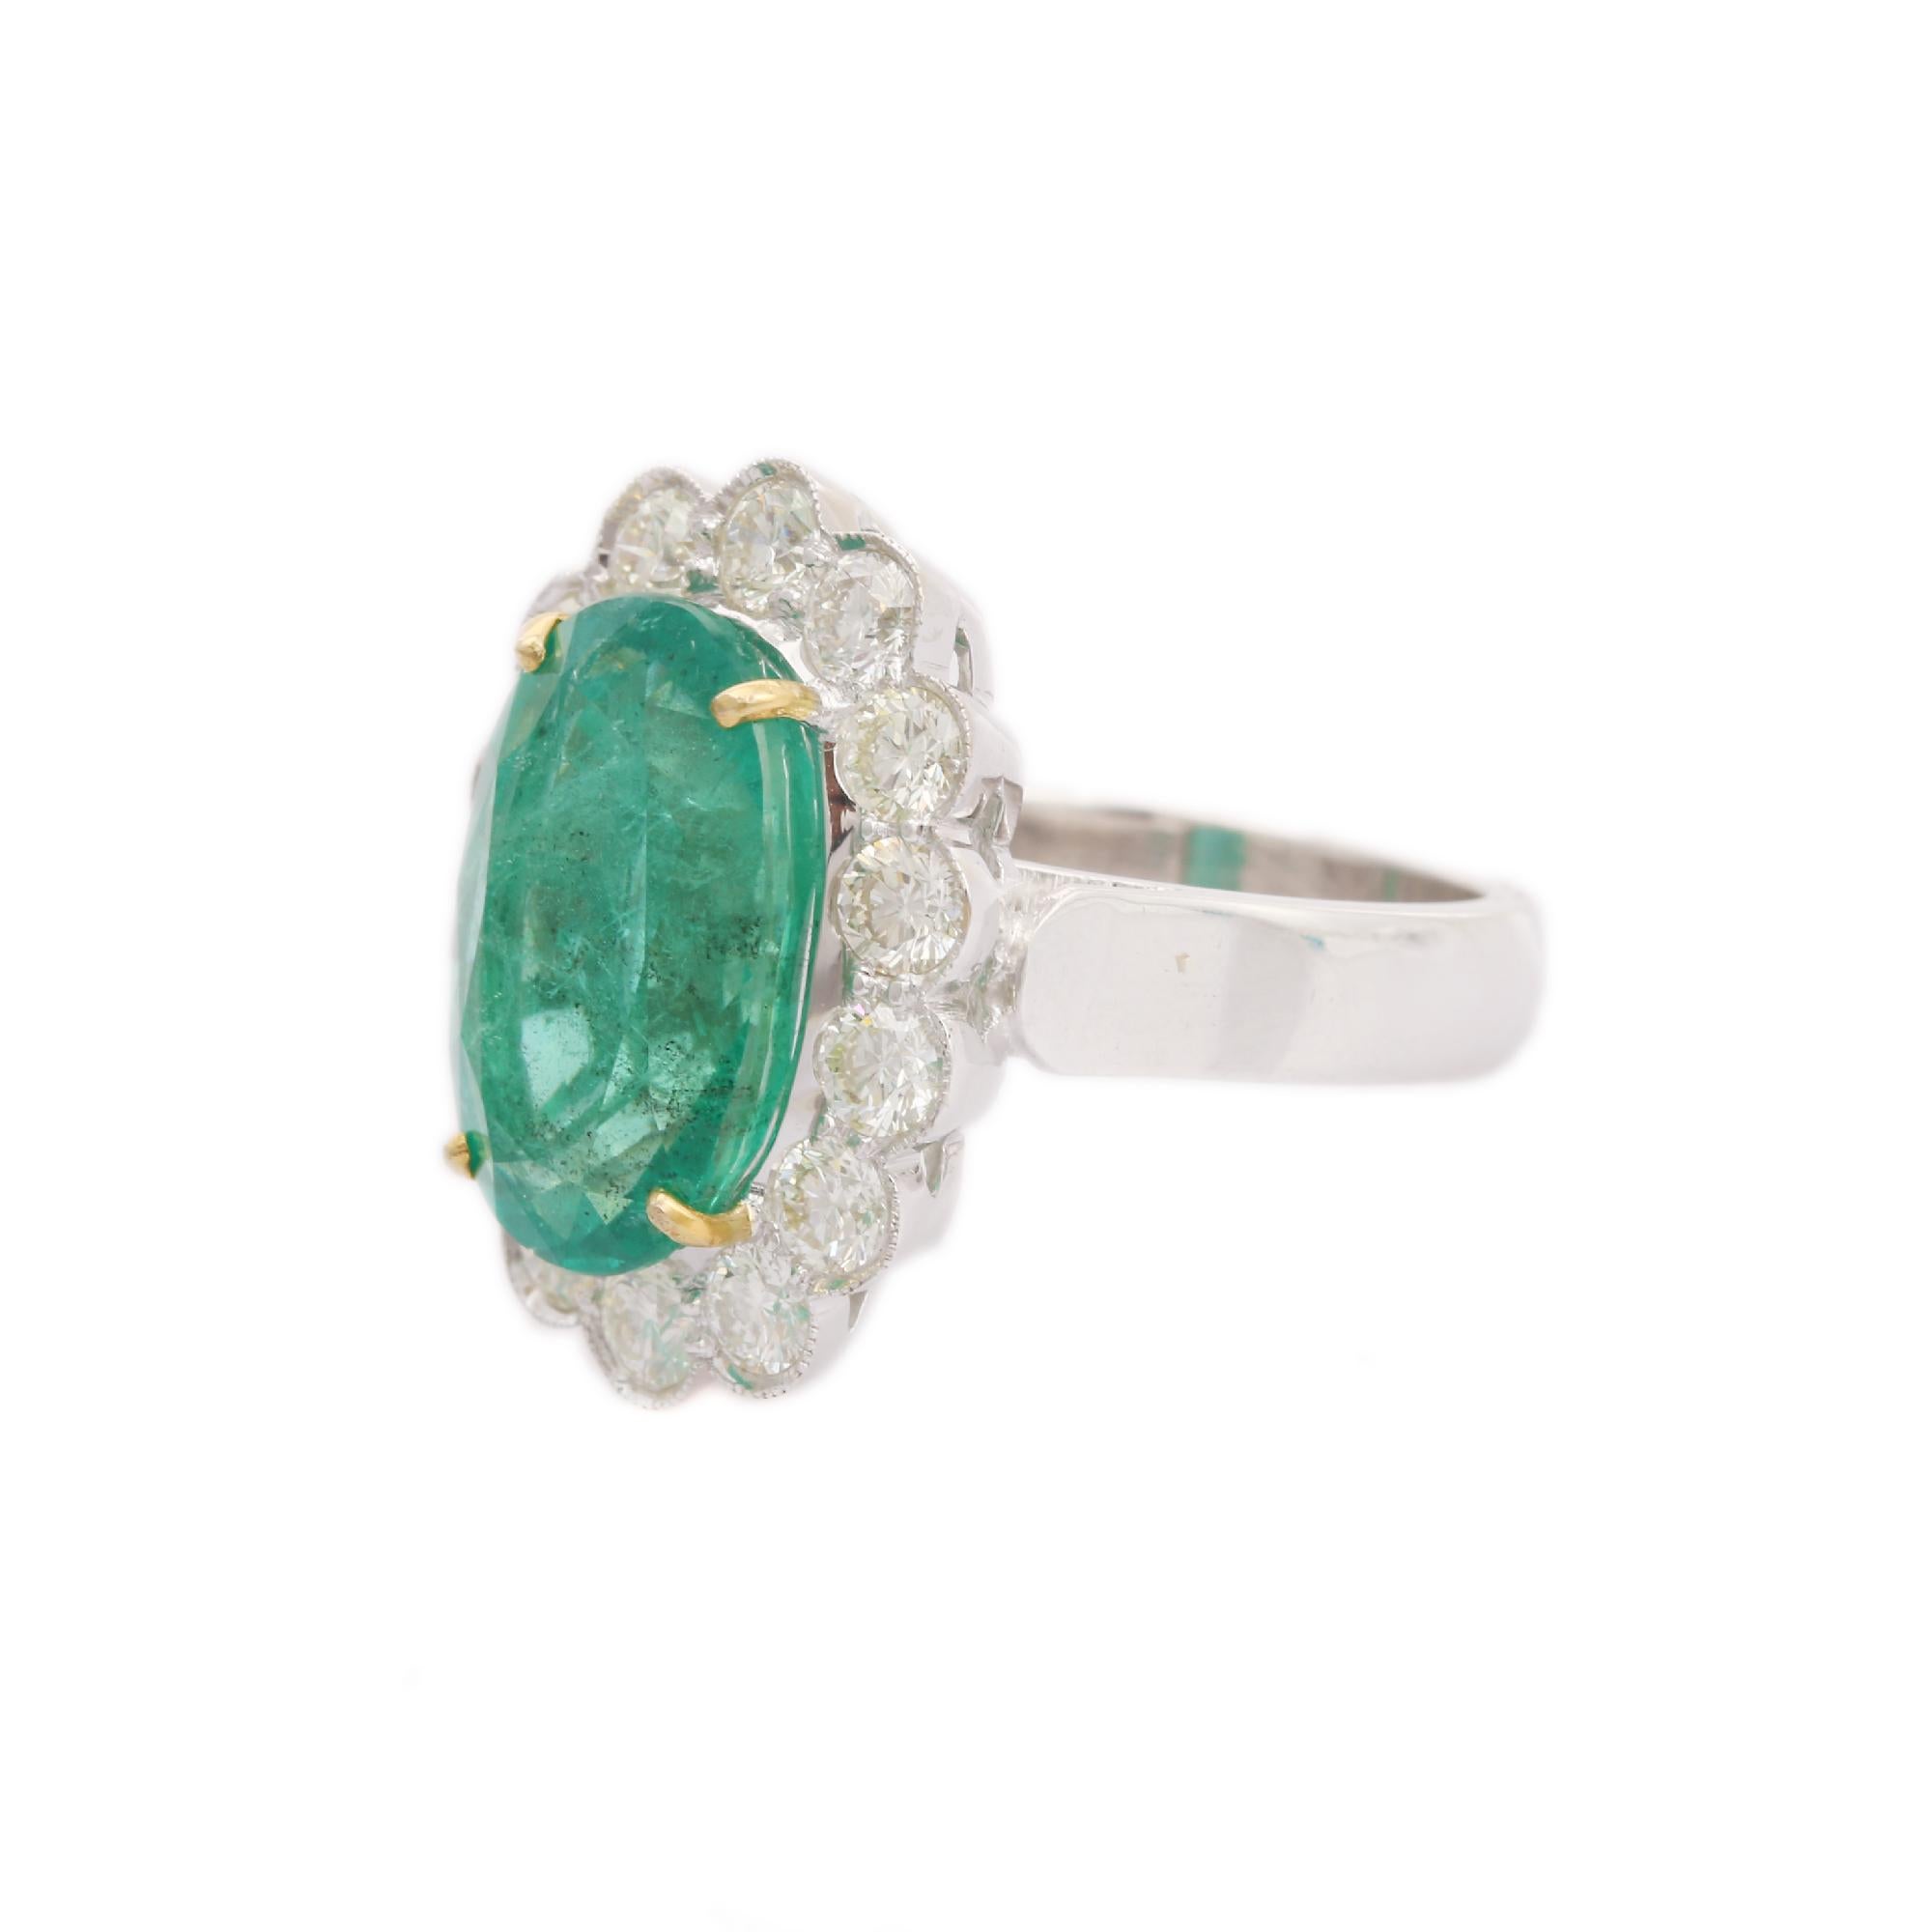 For Sale:  18kt Solid White Gold 8.21 Carat Emerald Gemstone Ring With Diamonds 2